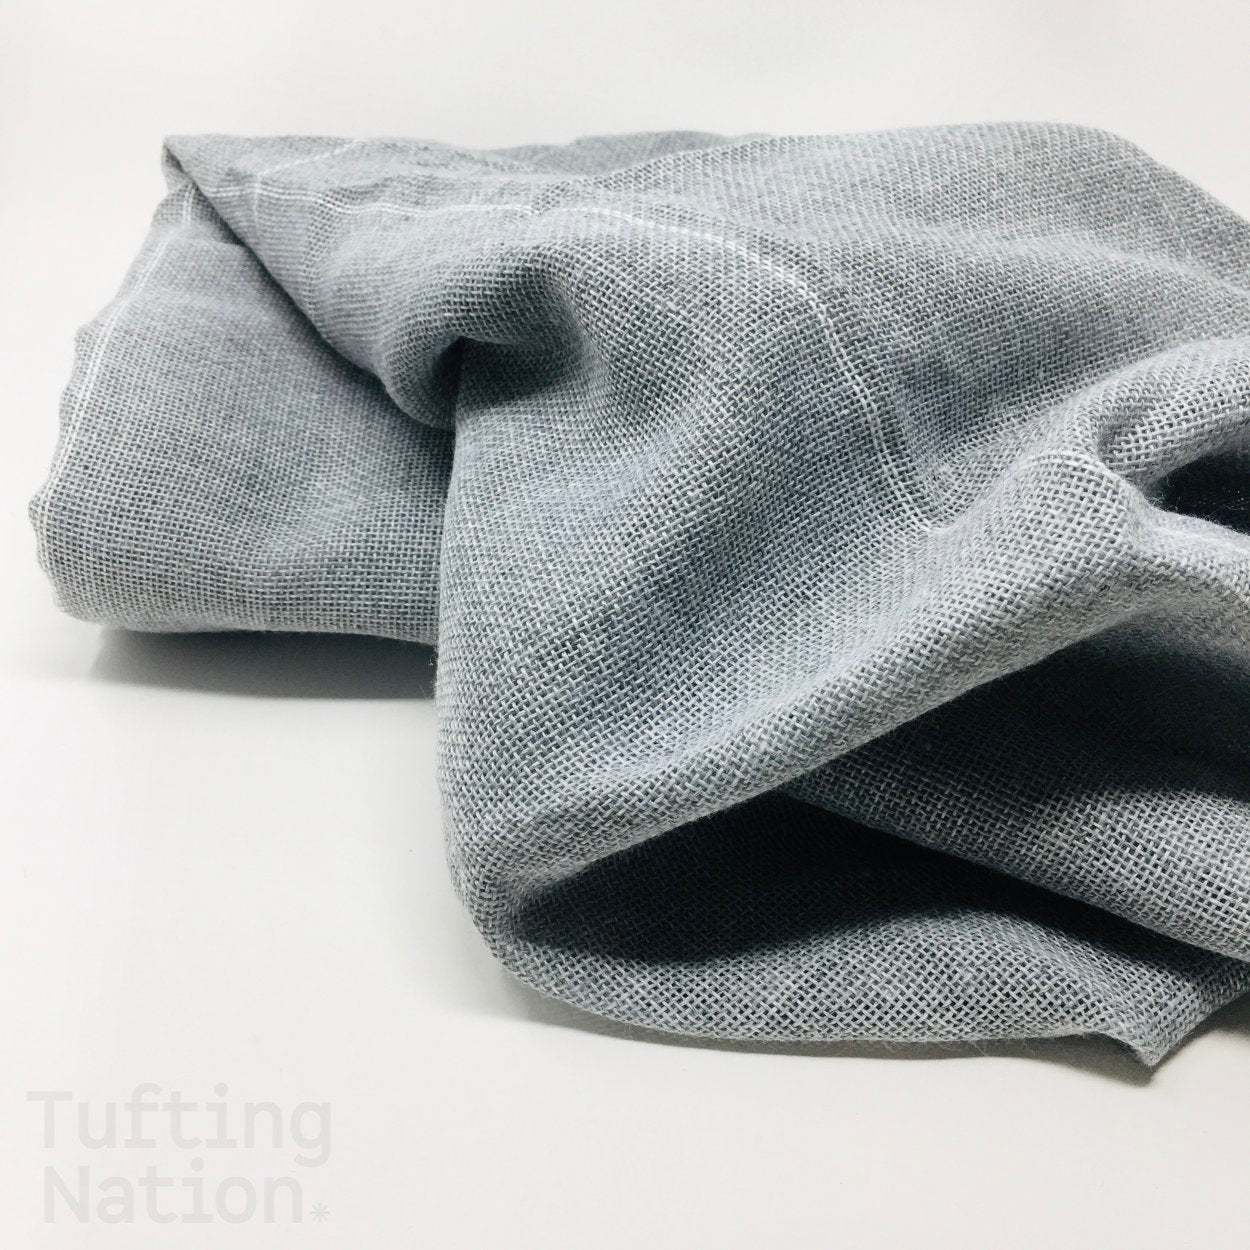 Rug Primary Backing Material for Rug Tuffting | TuftingNation